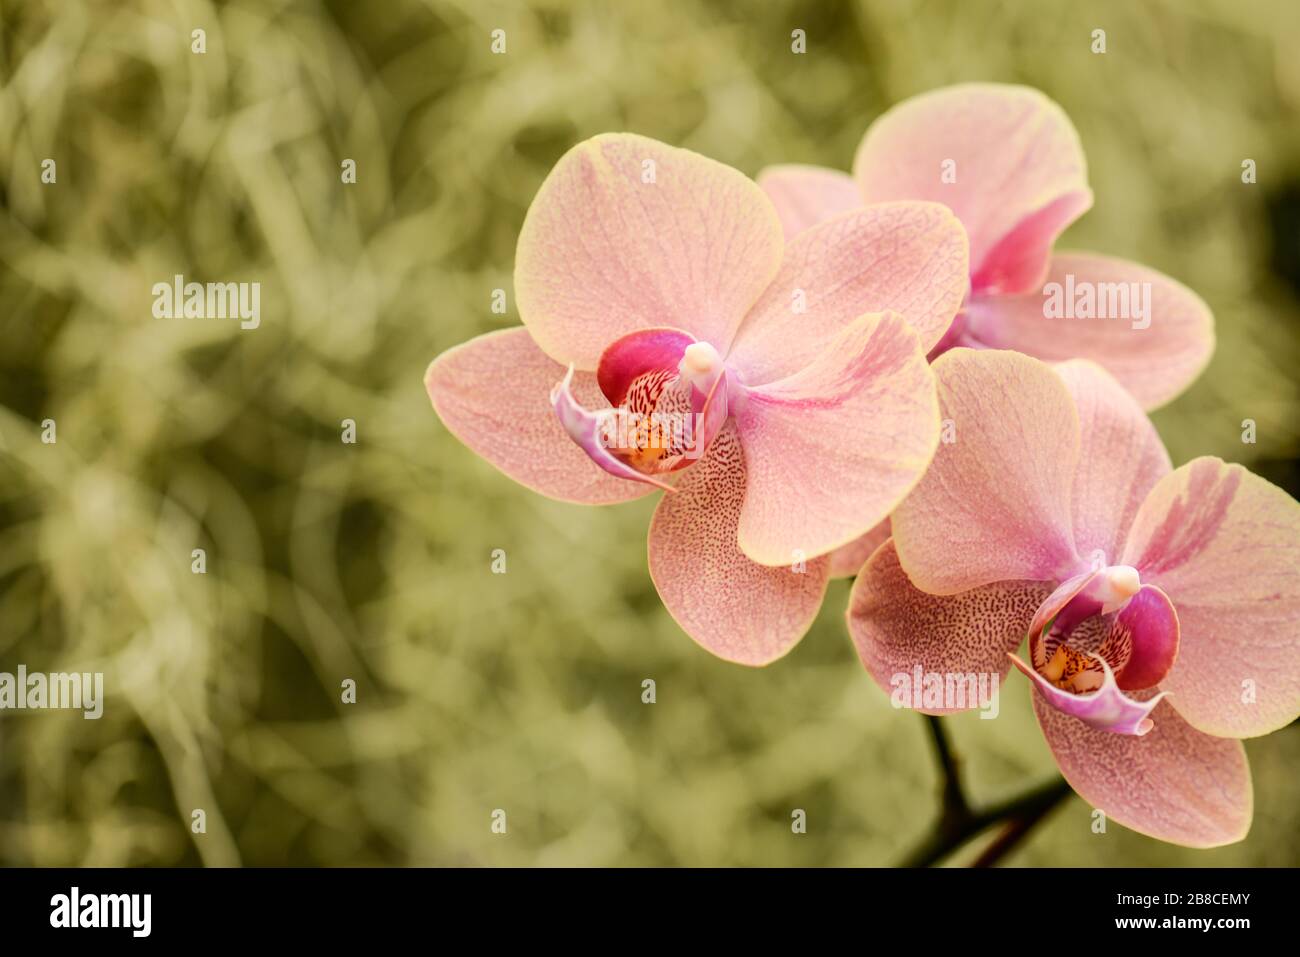 Exquisite, dainty Peach Orchid Flowers against an olive green, blurred background in a garden in New Jersey. Stock Photo